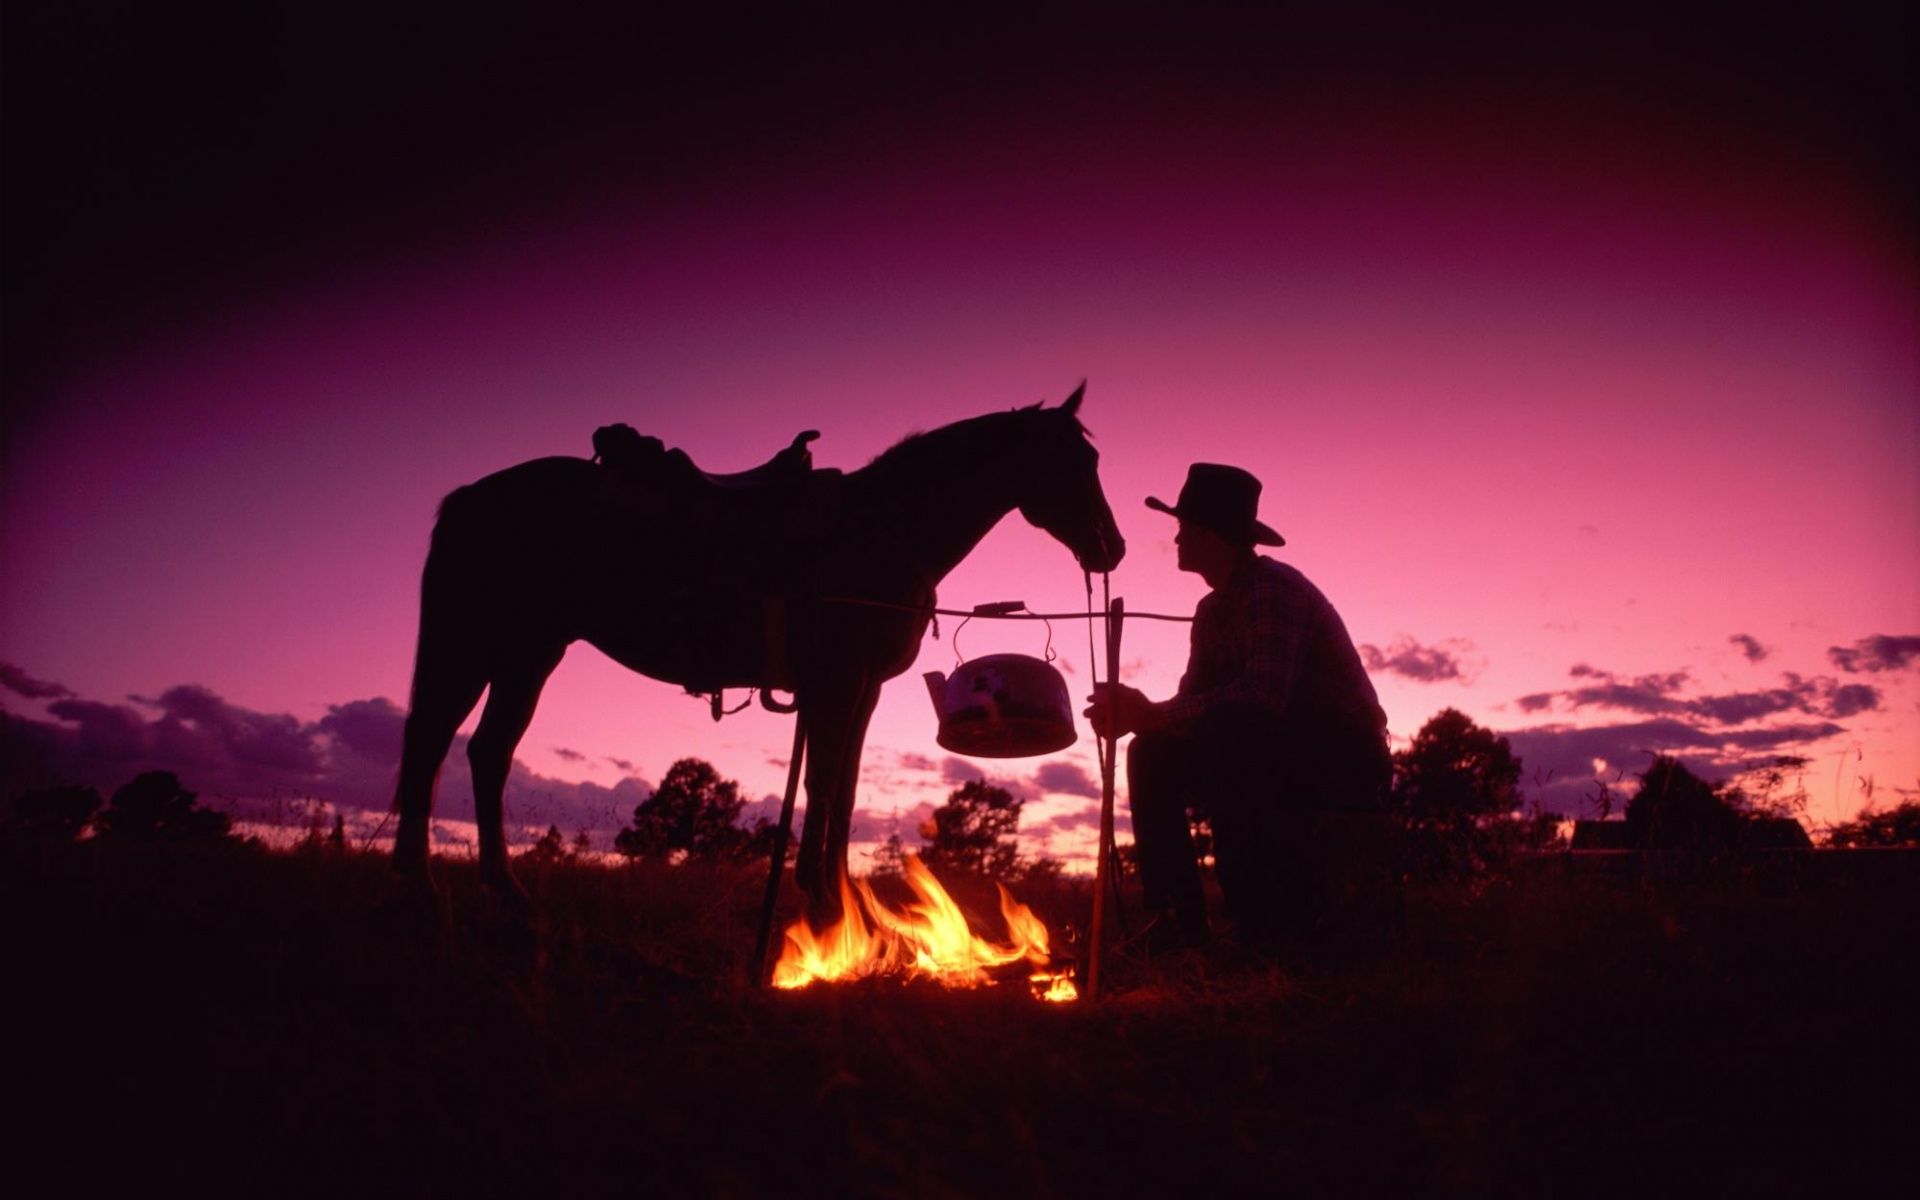 Wild West Evening wallpapers and images - wallpapers, pictures, photos